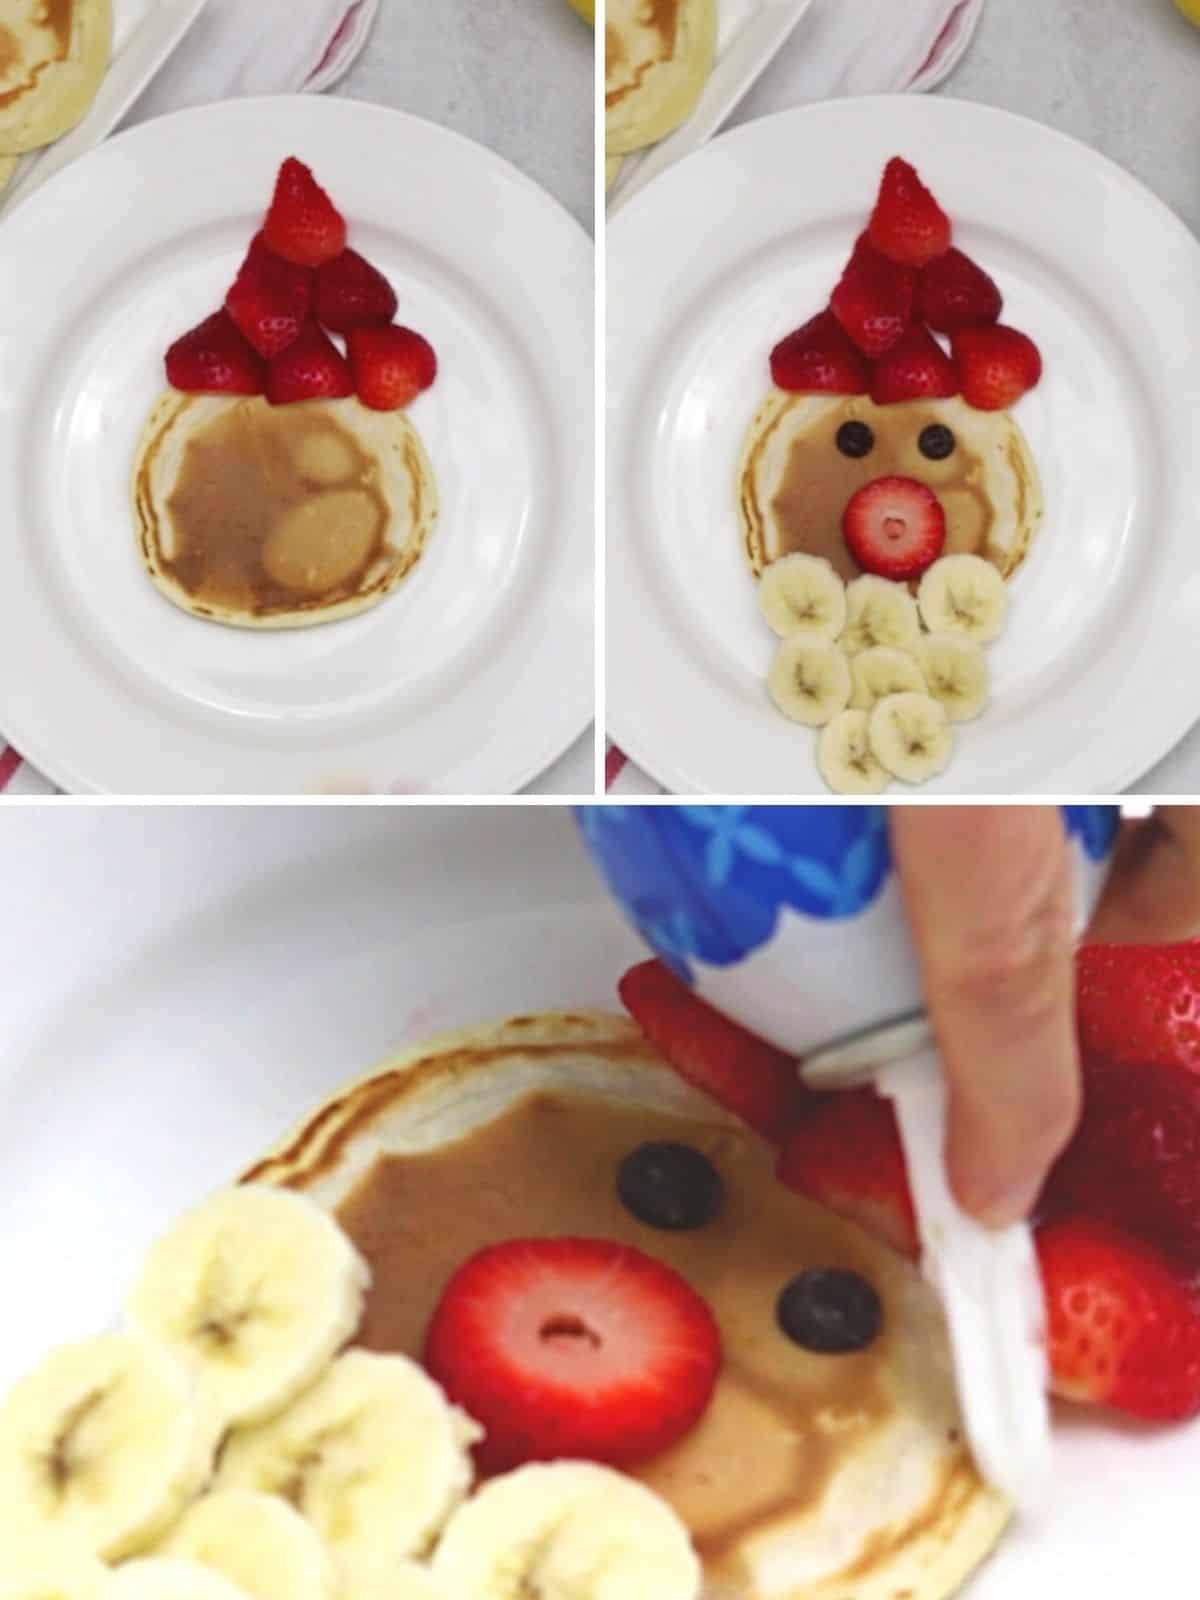 Collage of 3 pictures showing adding strawberries, bananas, and whipped cream to form a santa.